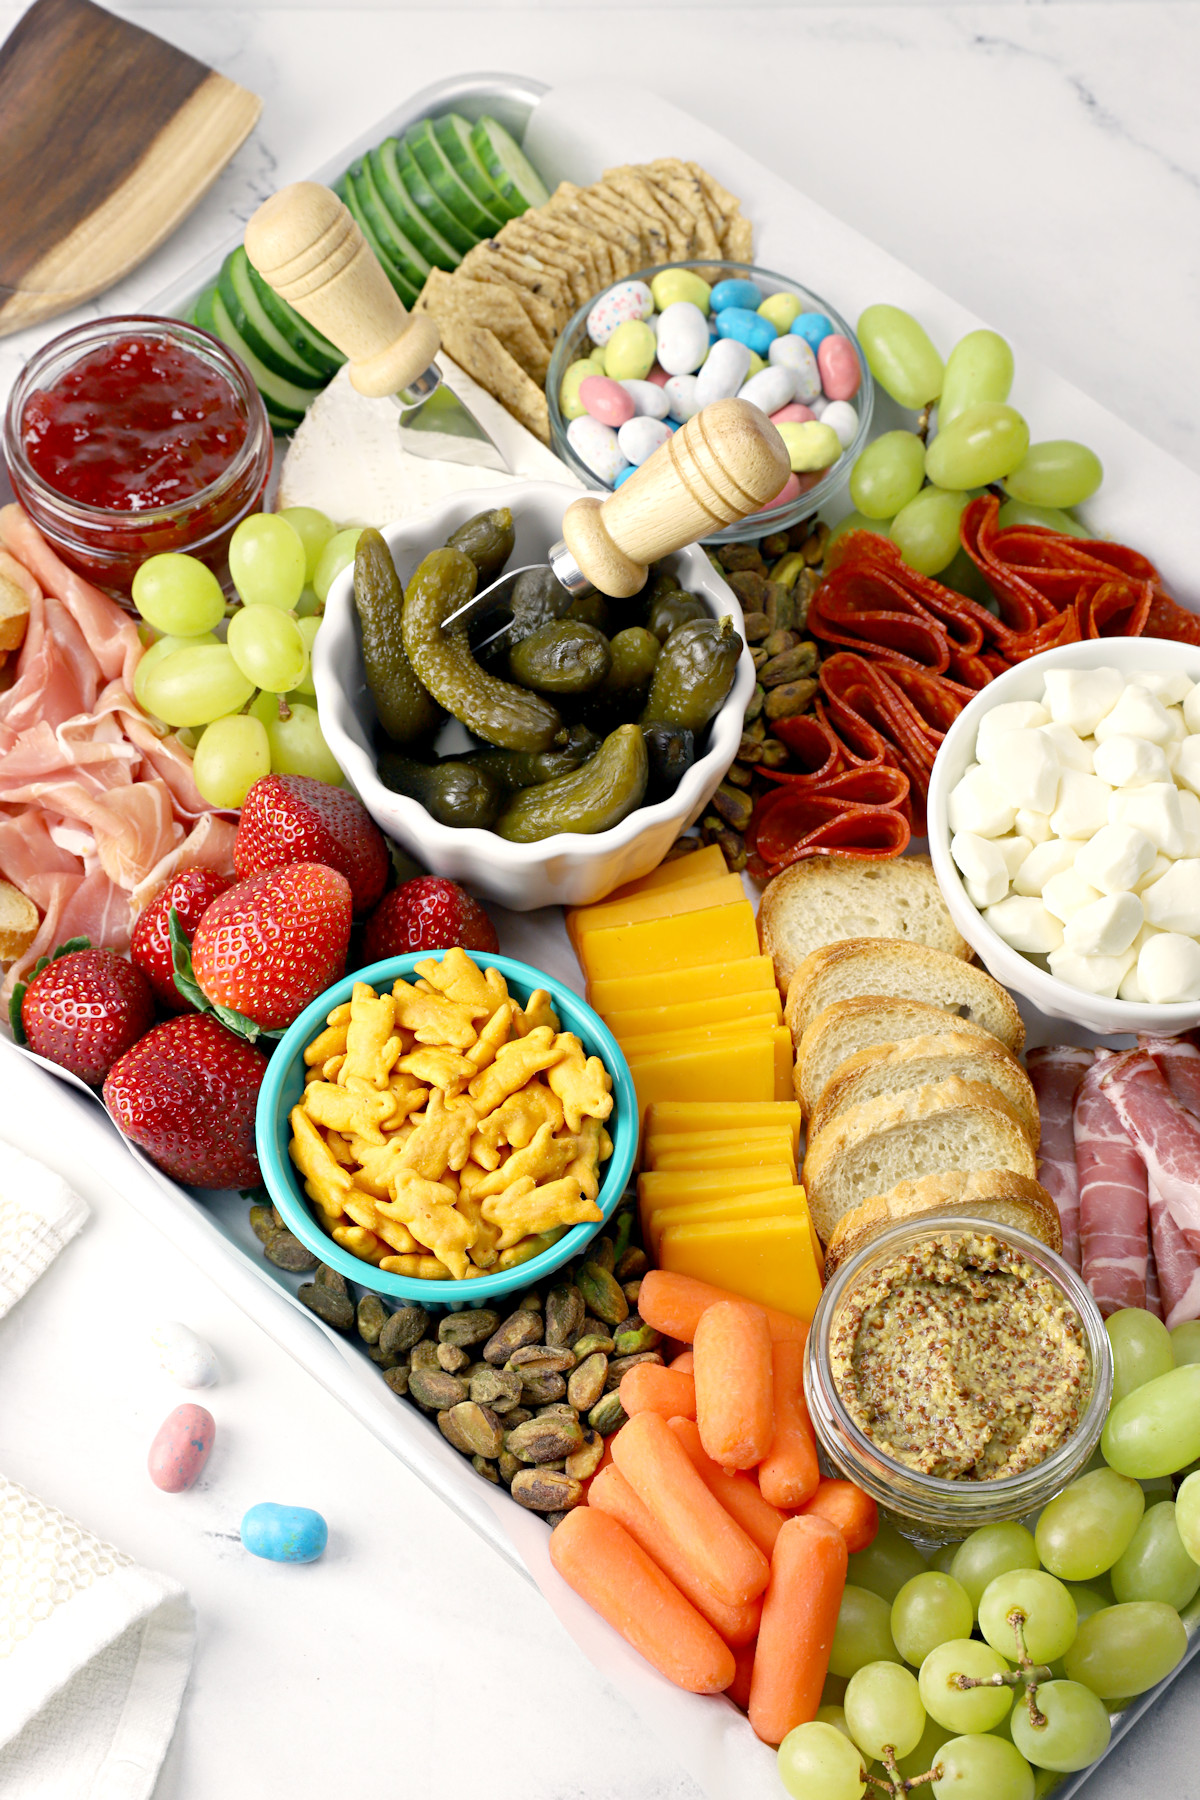 Meats, cheeses, crackers, and fruits set up on an Easter charcuterie board.